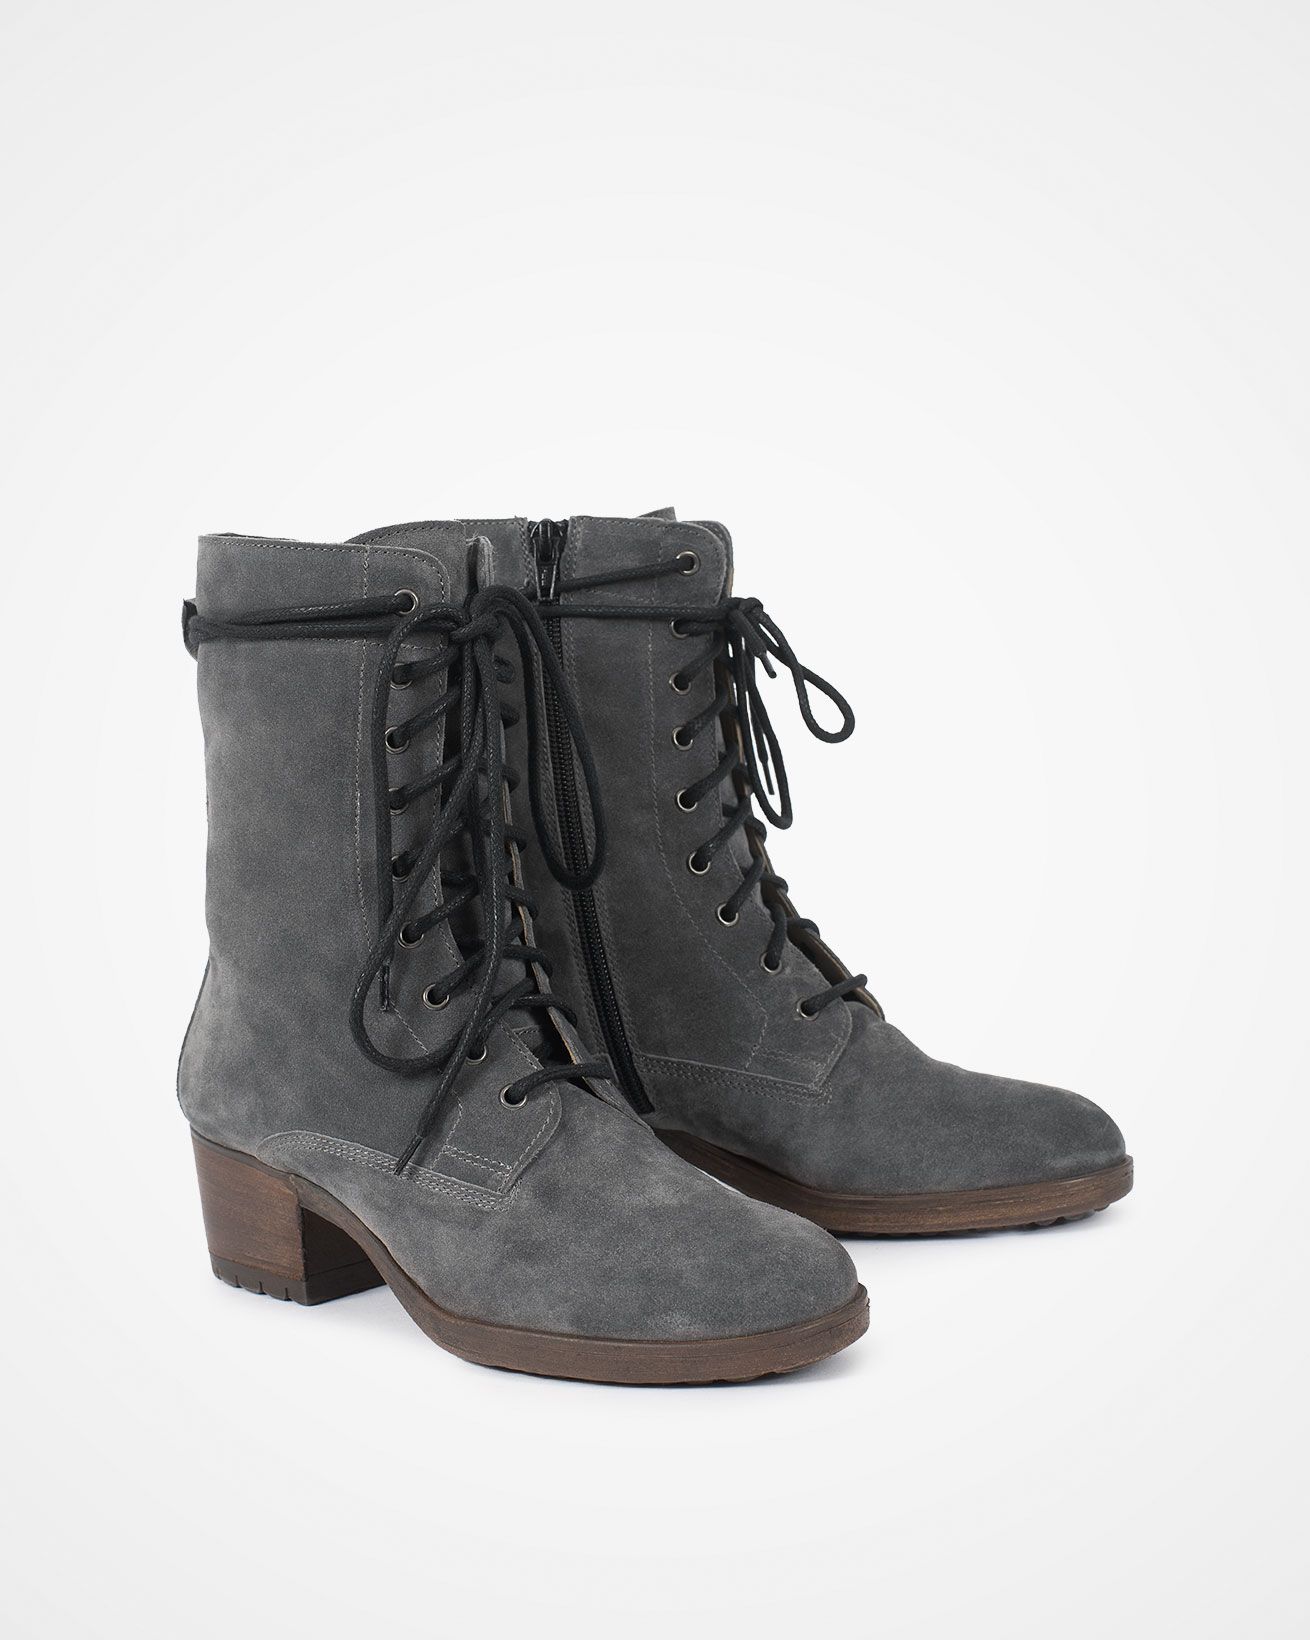 7794_block-heel-lace-up-ankle-boots_smoke-grey_pair.jpg